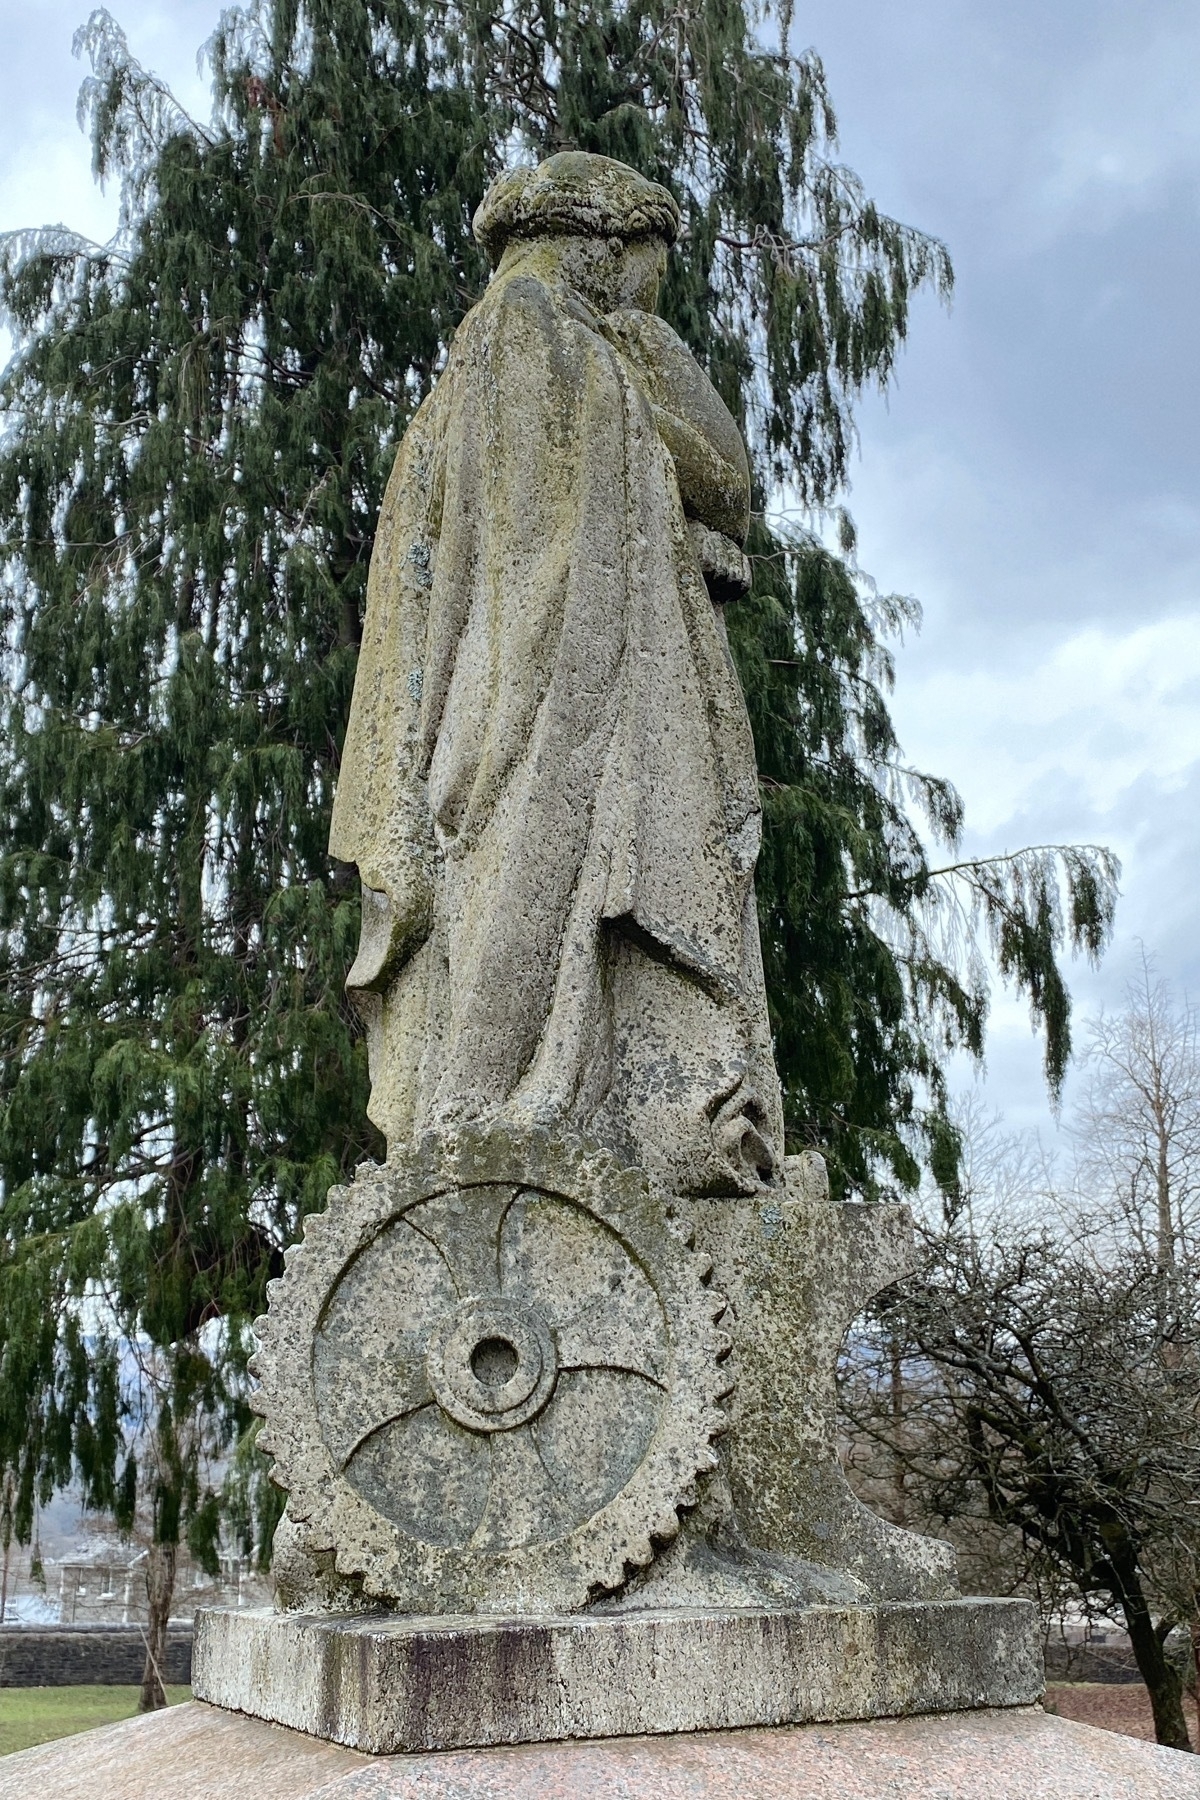 Stone statue of a woman with a cog wheel at the base